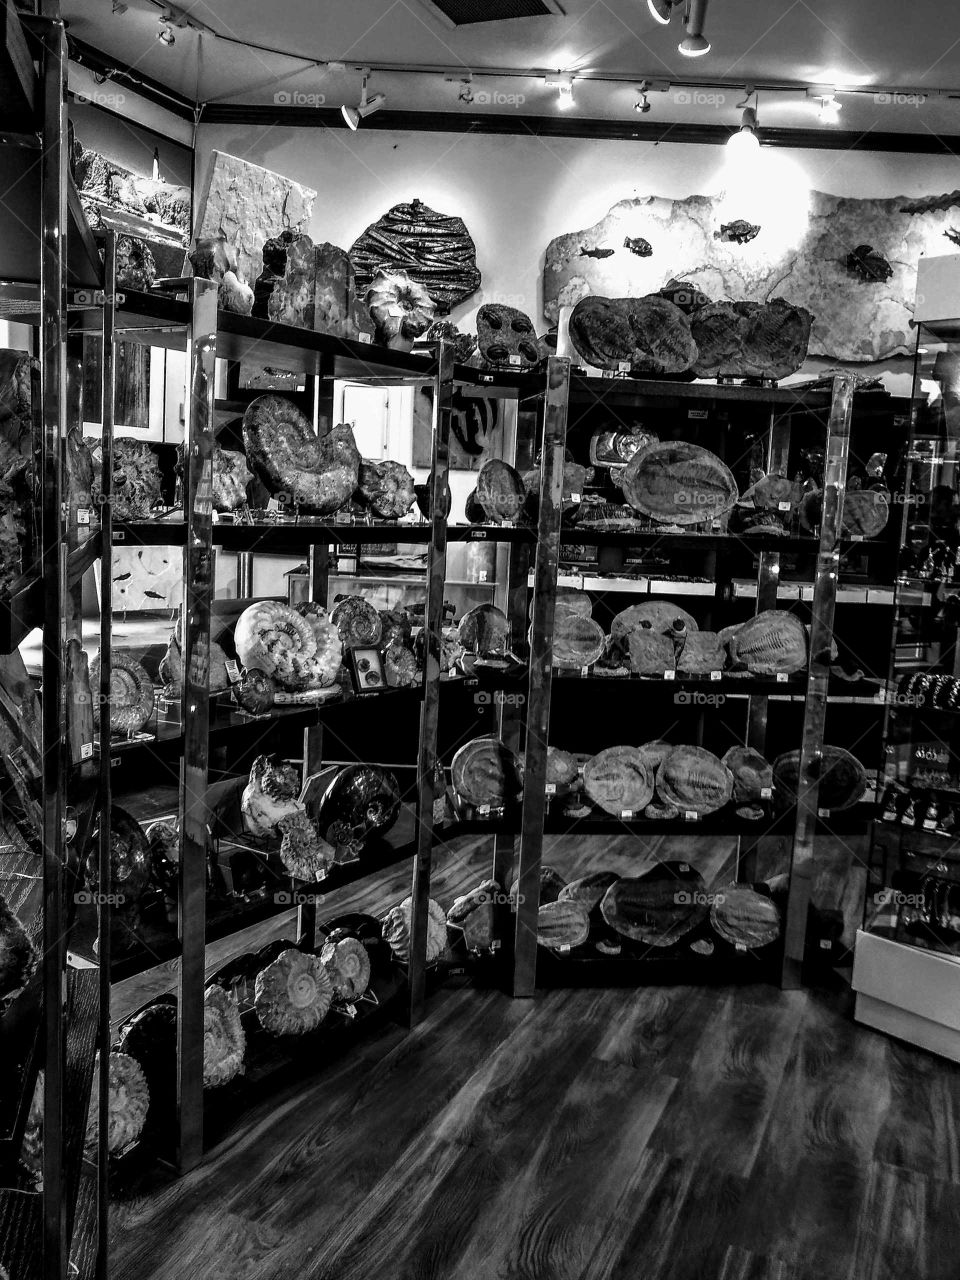 Lovely Black and White of Prehistoric Dinosaur Fossils in Store Setting "Fossil Me Crazy"